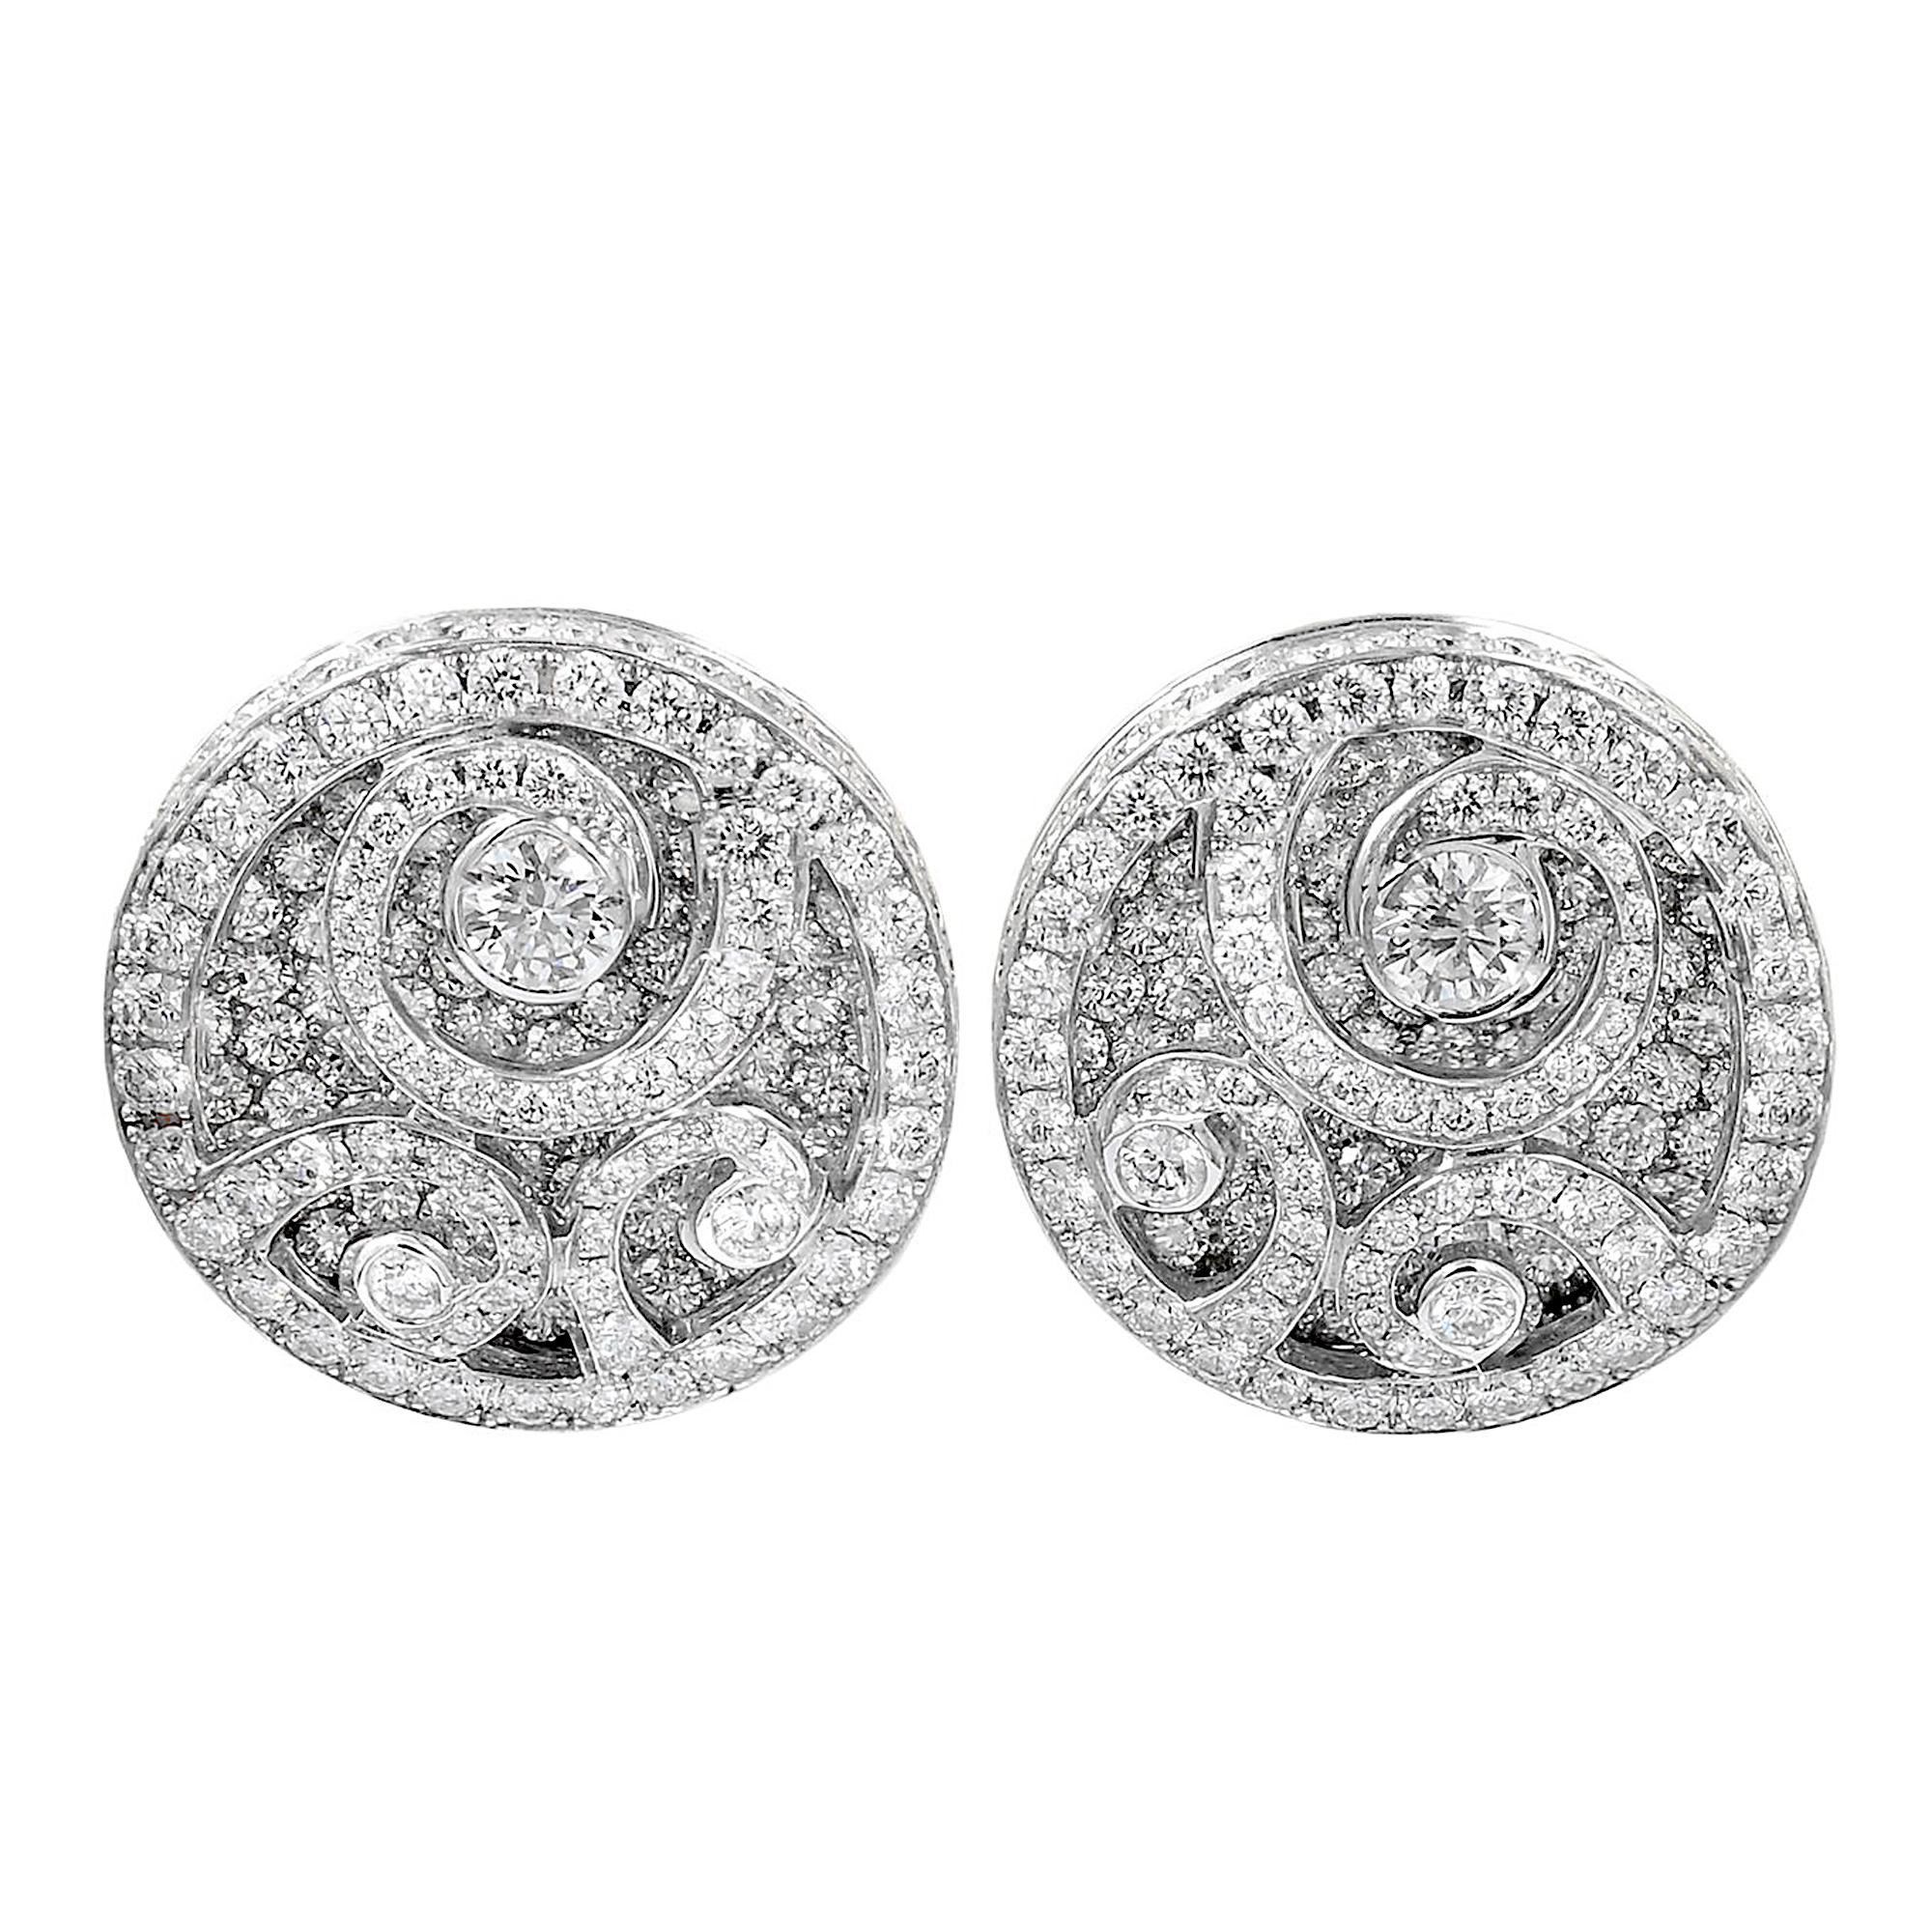 The earring are intricately set with approximately 5.35 carats of diamonds. These diamonds are carefully selected for their exceptional quality and brilliance, ensuring that each earring sparkles with an intense fire and radiance.